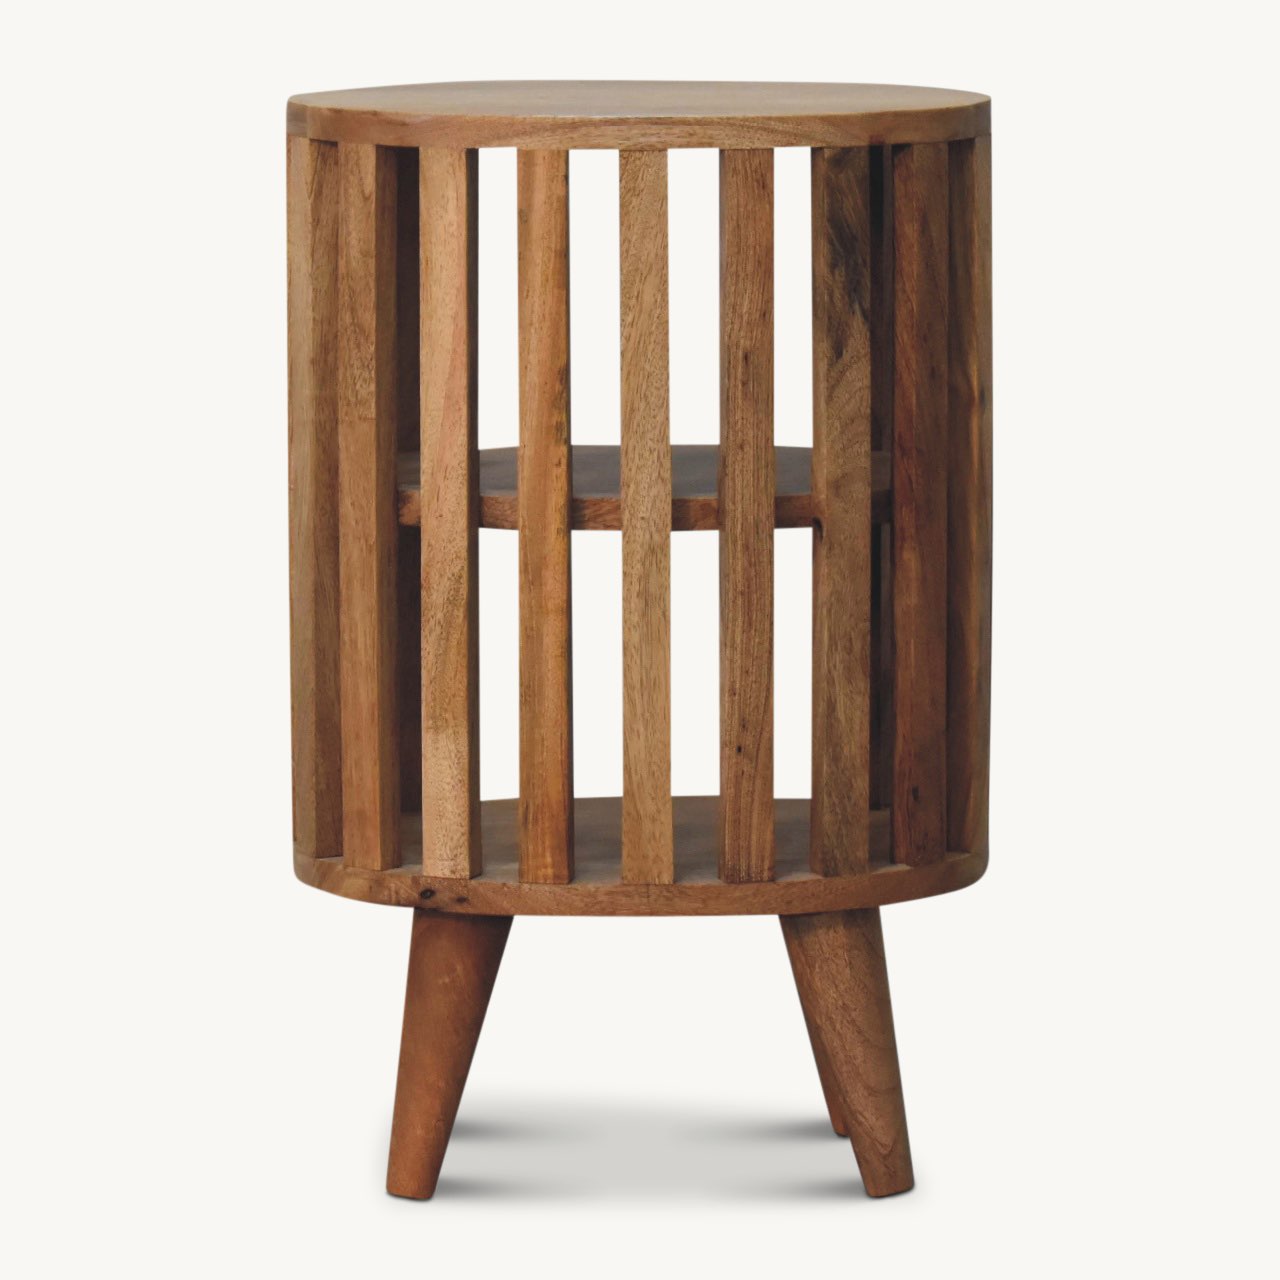 Natural wooden bedside table with slatted design and double shelf